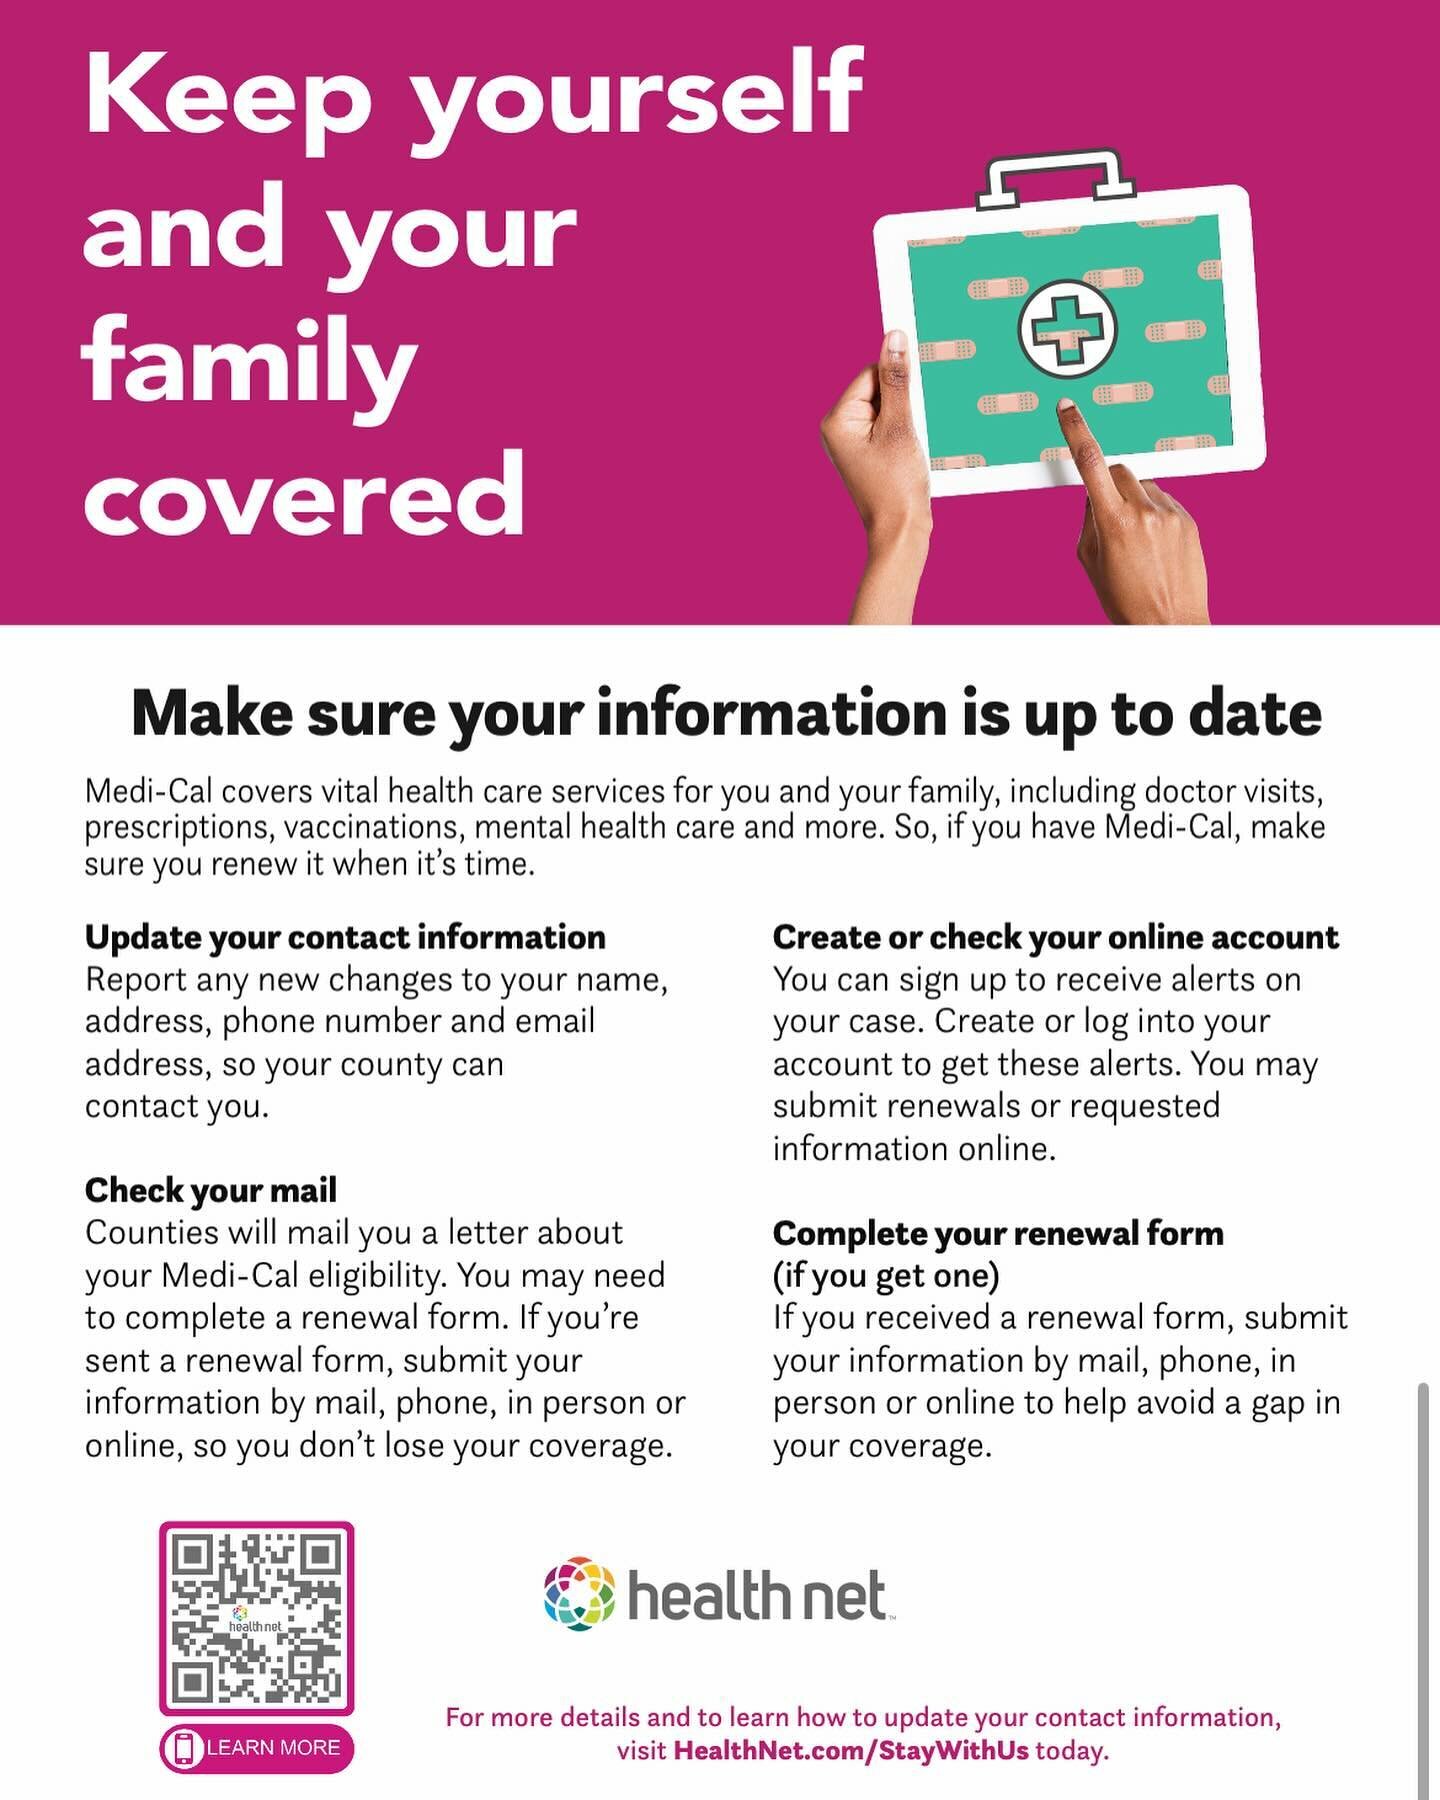 Your health matters, and so does your coverage. When it's time to renew, don't forget to reenroll in HealthNet and continue receiving the medical benefits that keep you and your loved ones protected and healthy. 🩺

Tu salud es importante, al igual q